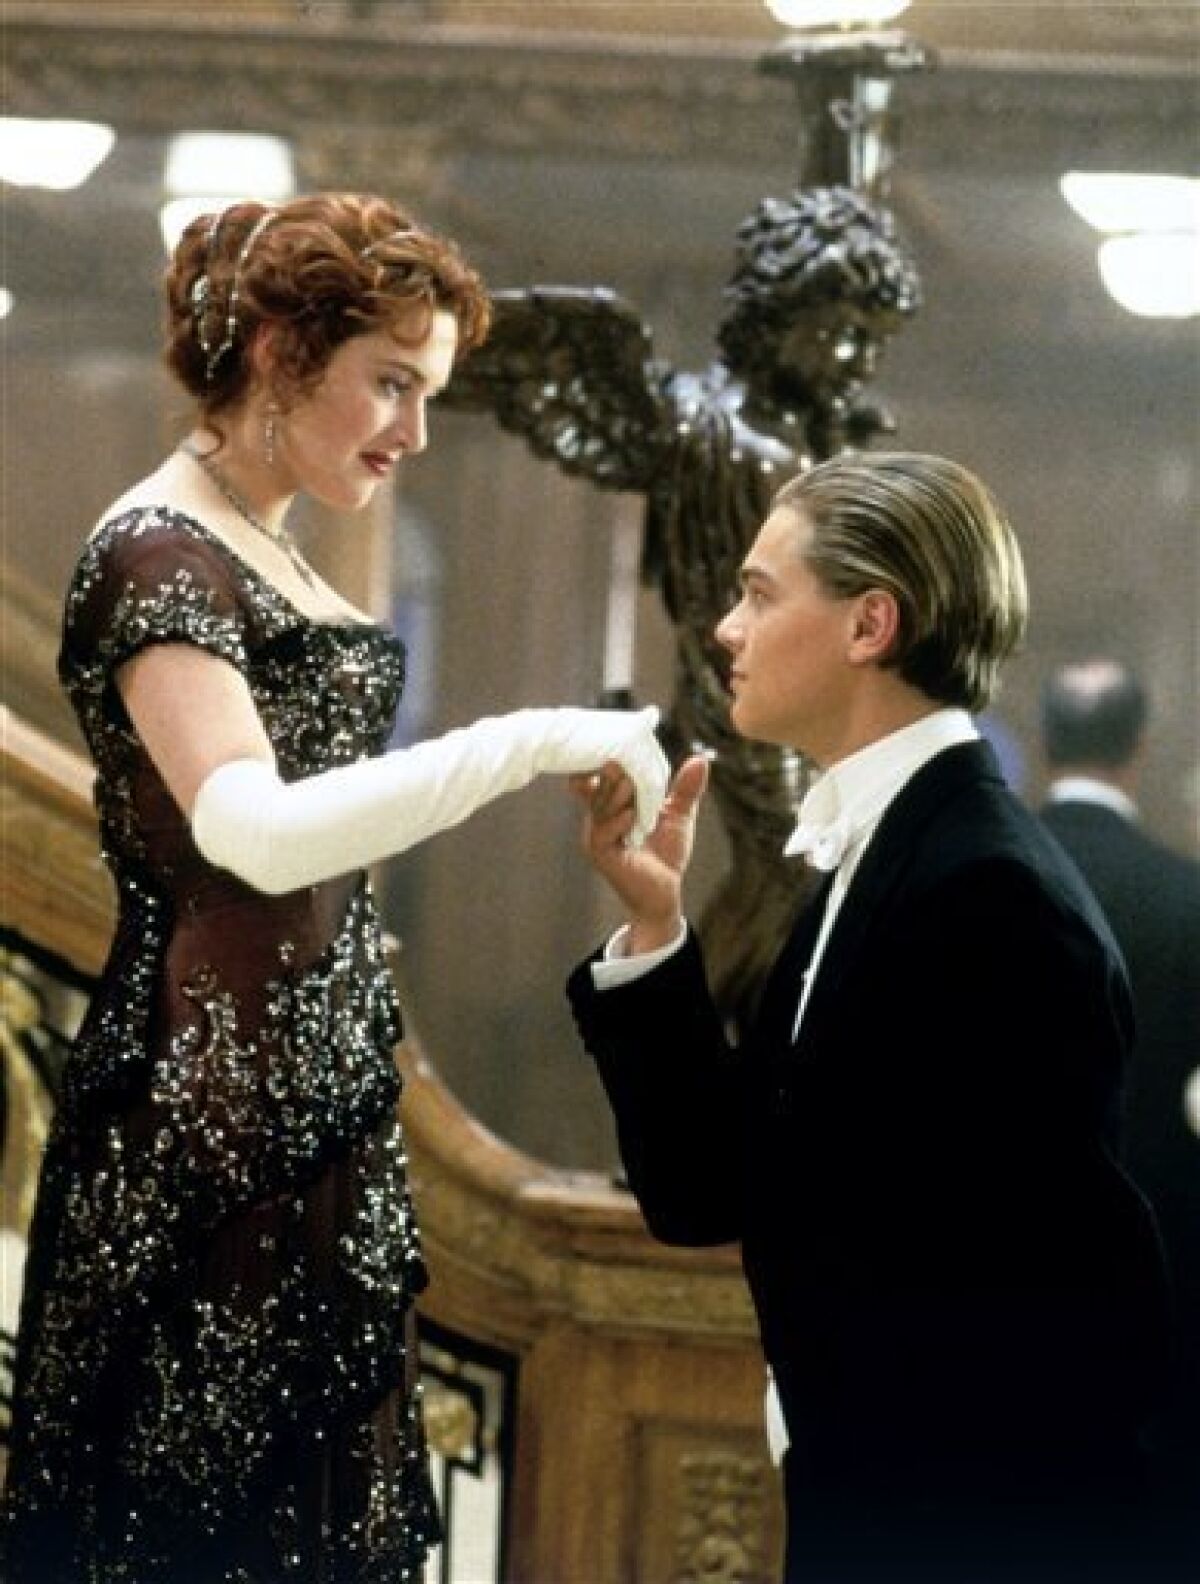 Titanic' duo DiCaprio and Winslet sail again - The San Diego Union ...